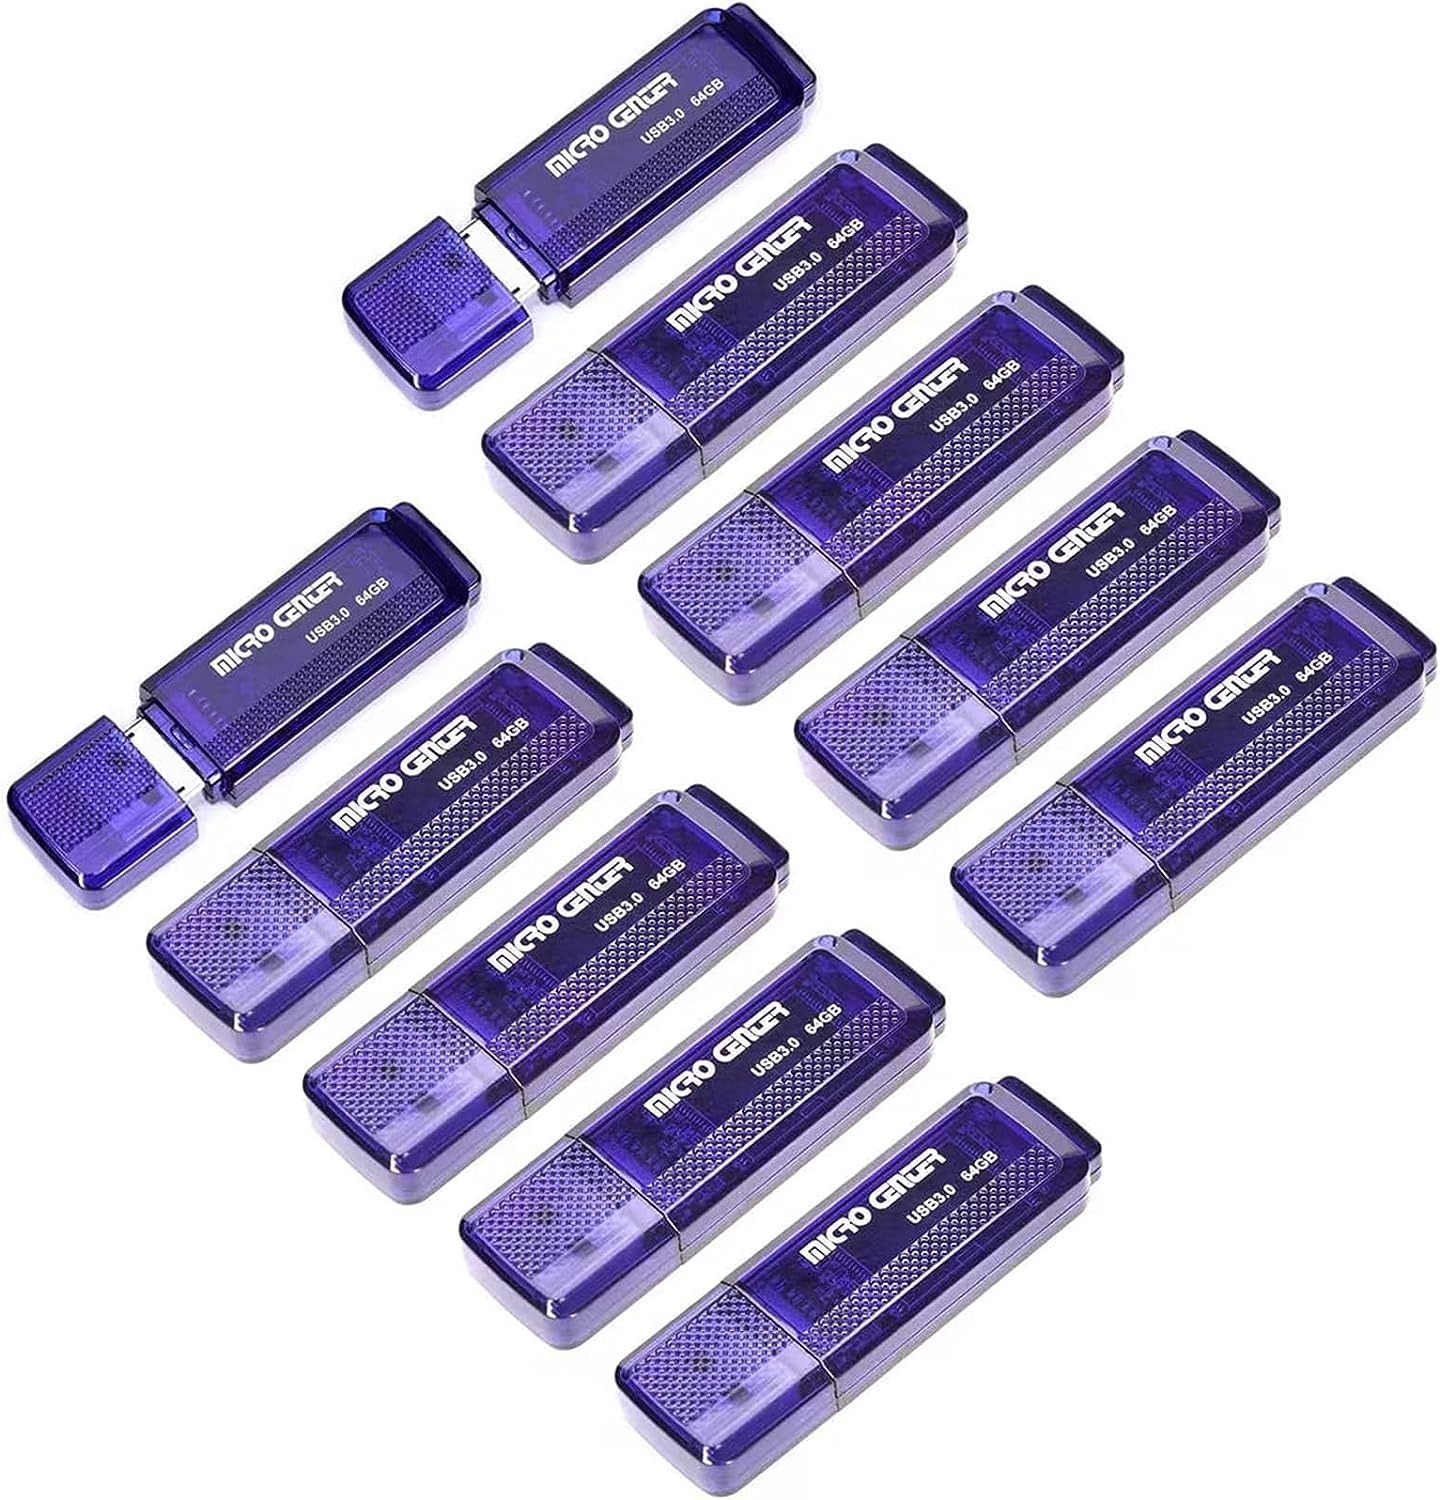 10-PK 64GB Micro Center SuperSpeed USB 3.0 Flash Drives (Read Speed Up to 70 MB/s) $34 + Free Shipping